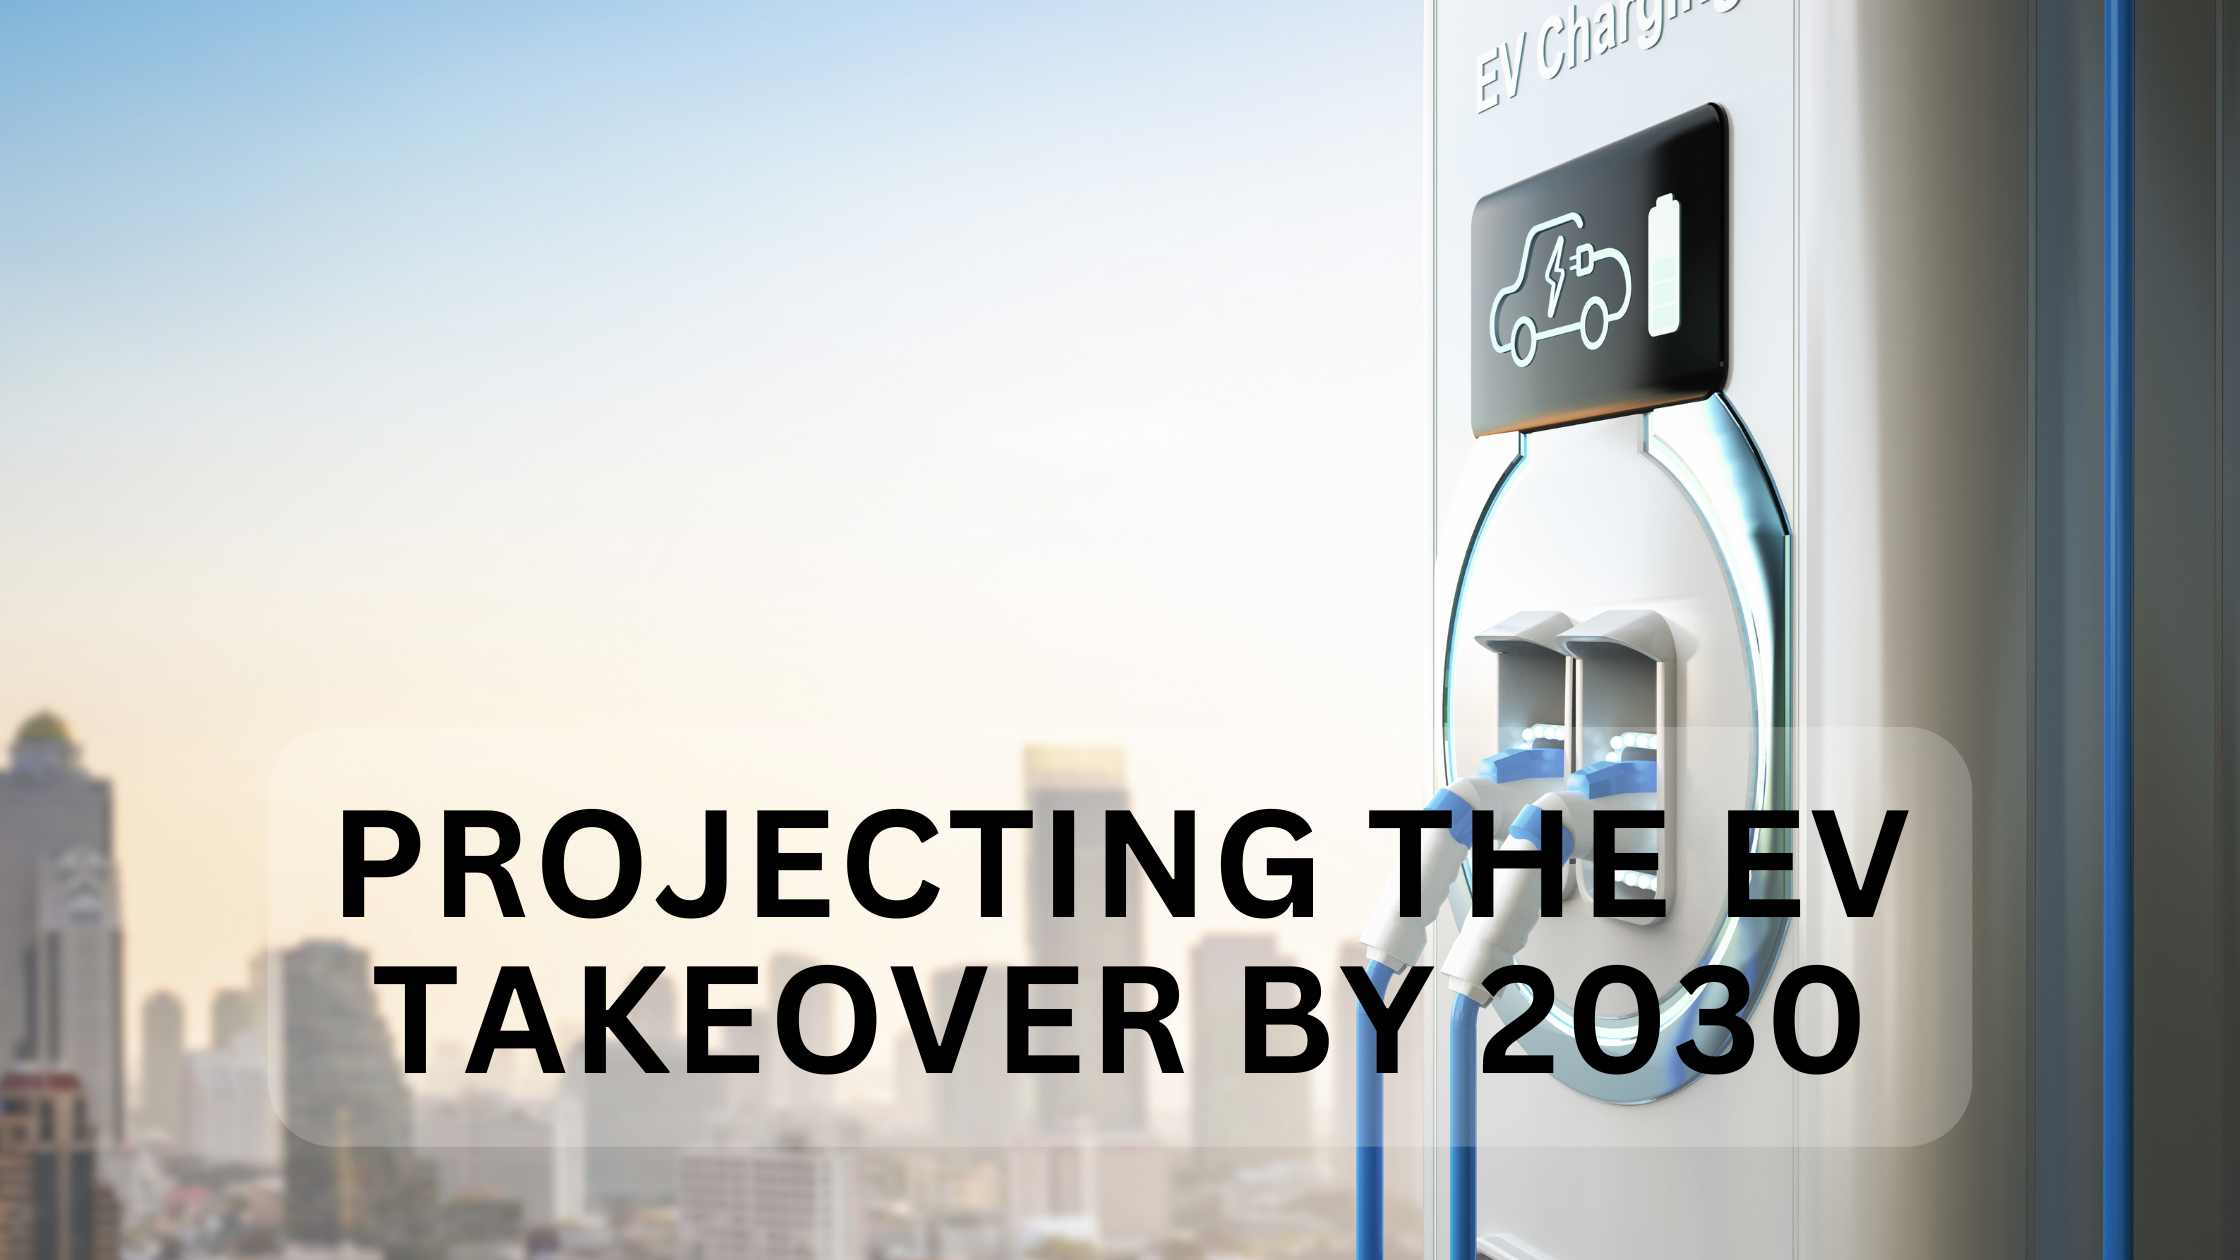 Projecting the EV Takeover by 2030